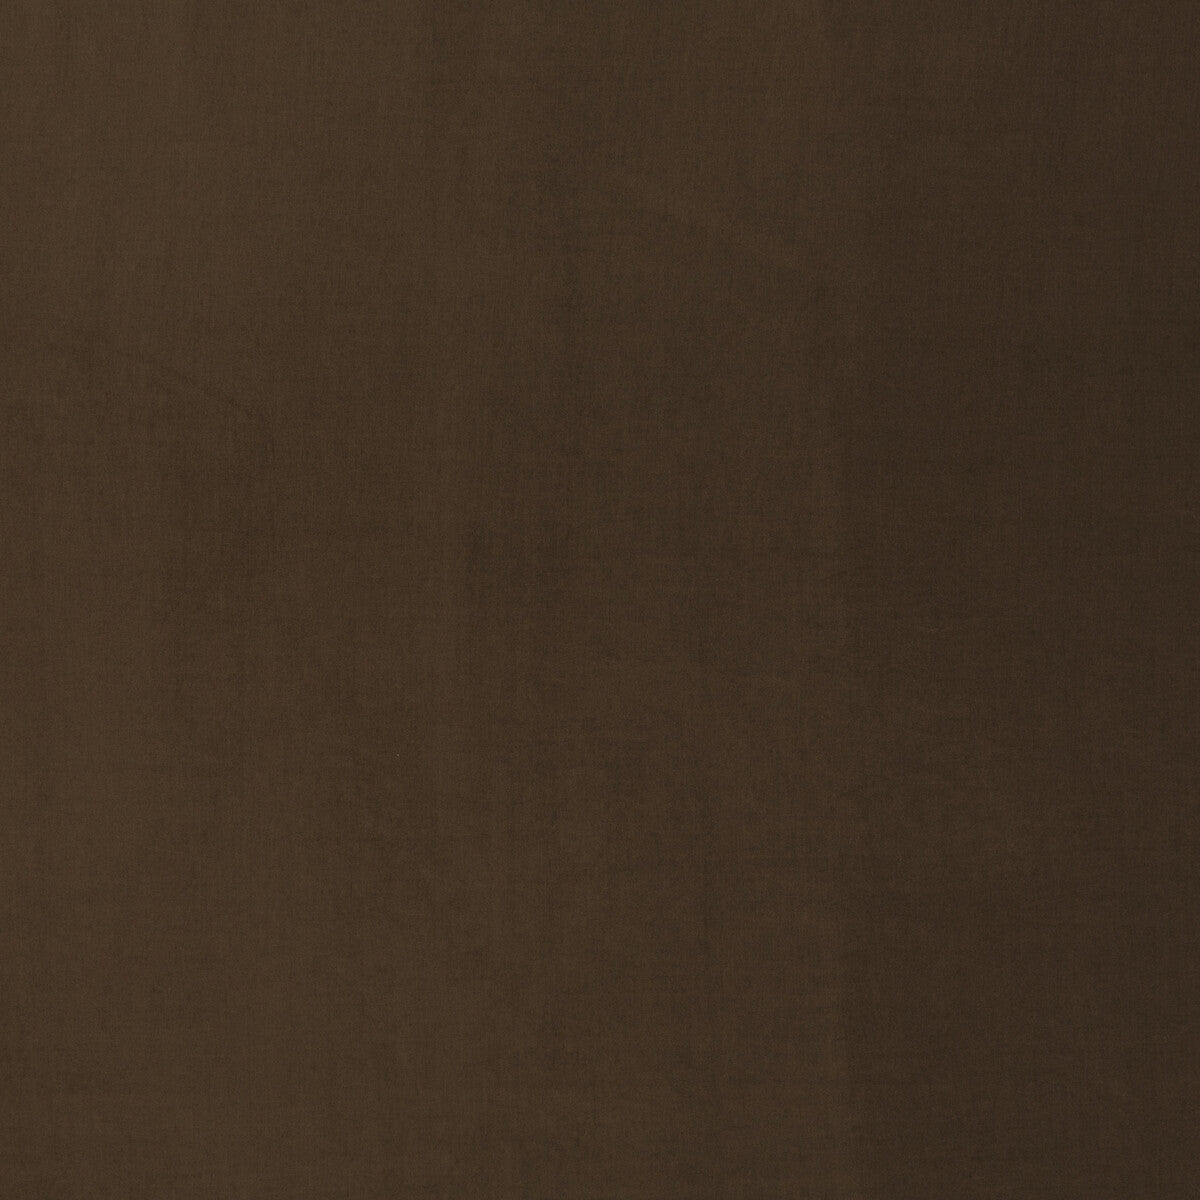 Milborne fabric in chocolate color - pattern PF50411.290.0 - by Baker Lifestyle in the Notebooks collection